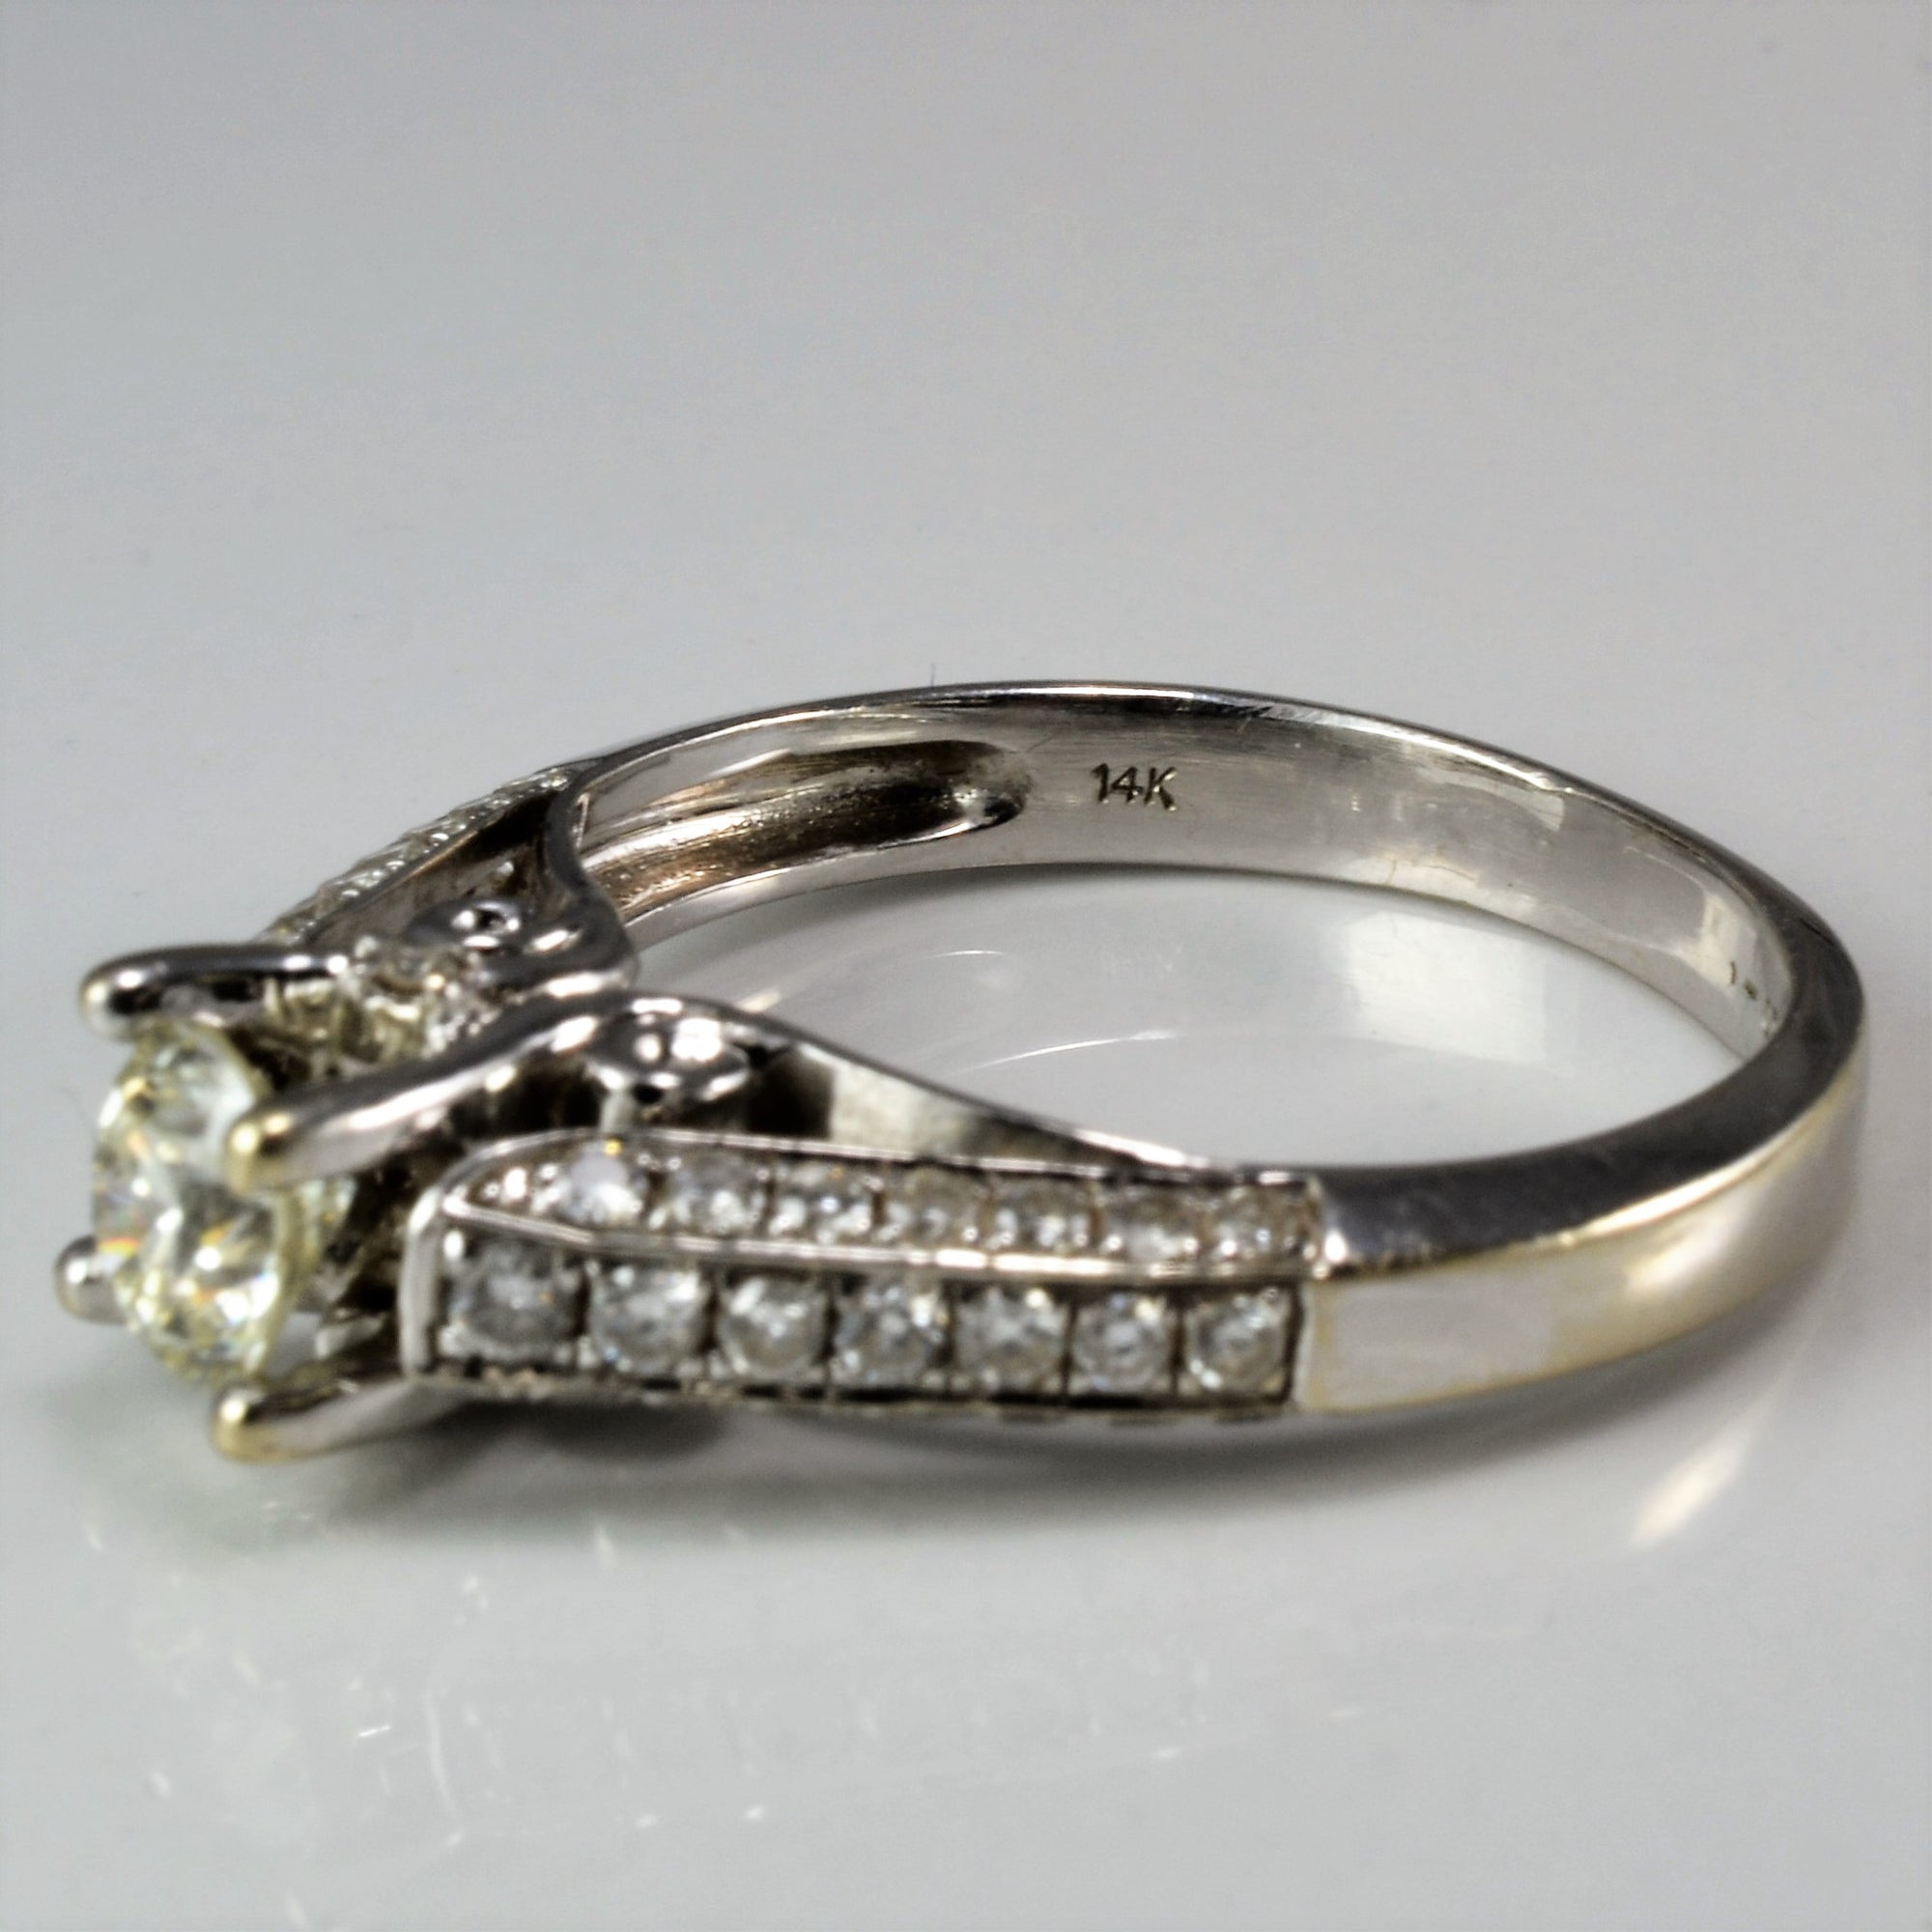 Intricate Cathedral Engagement Ring | 1.29ctw | SZ 7.75 |